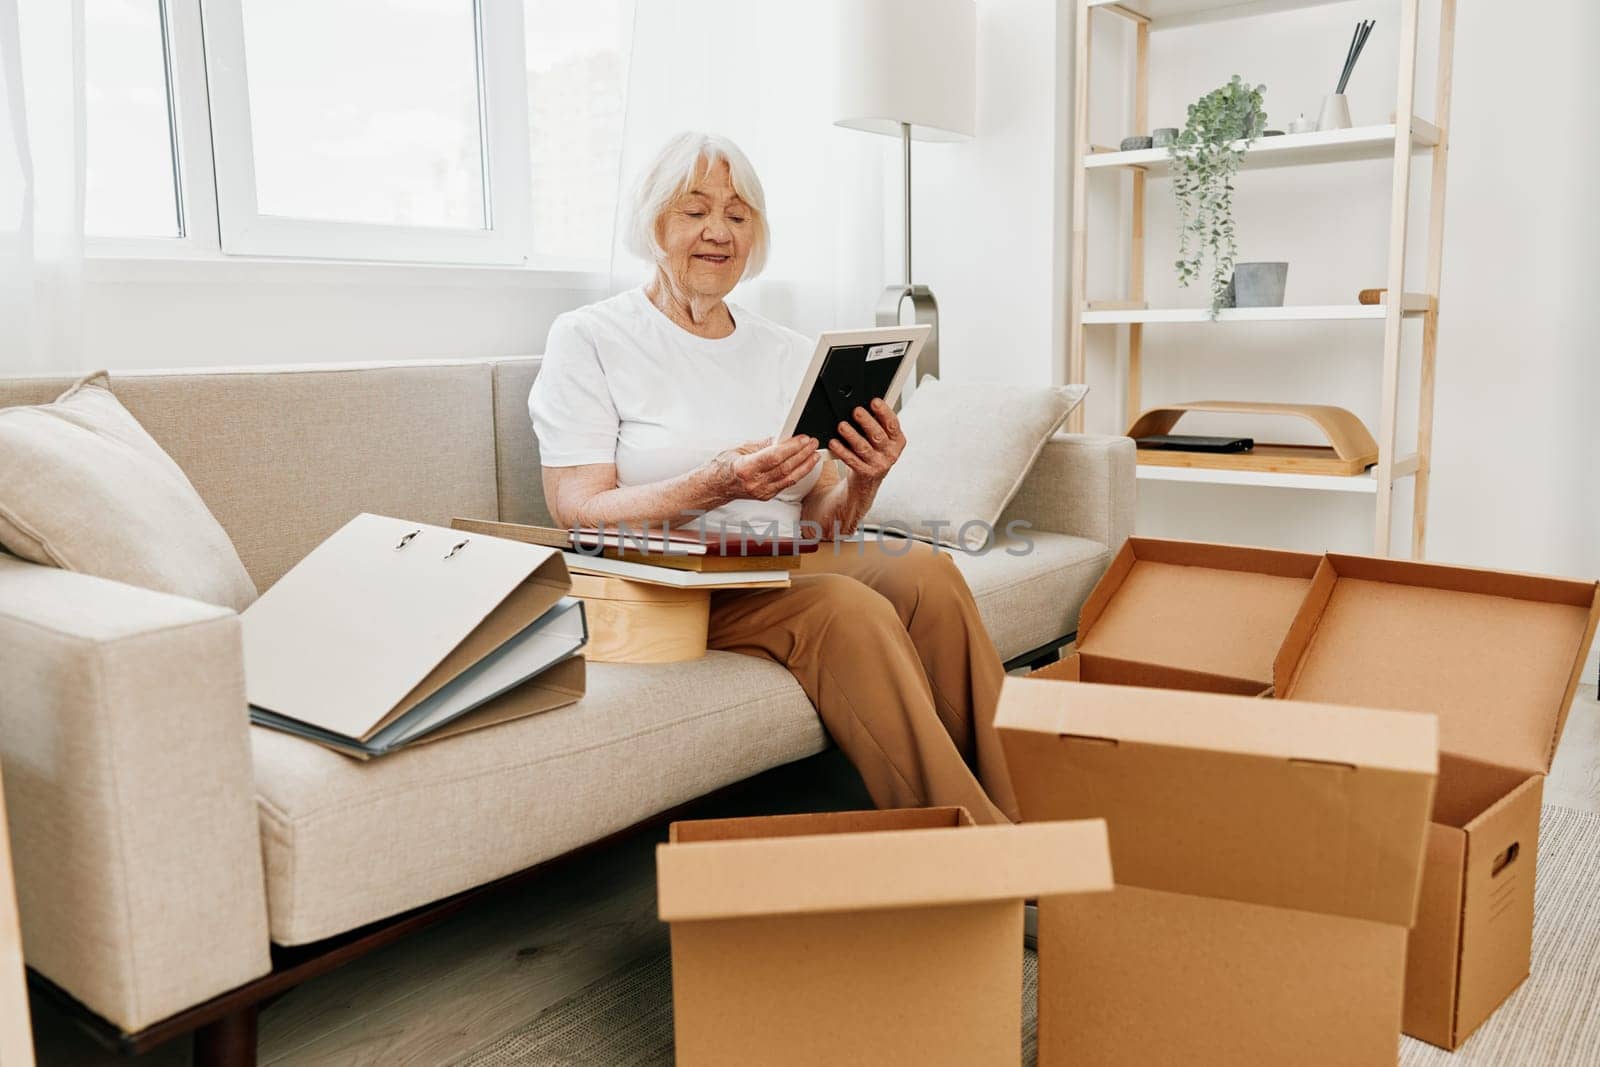 elderly woman sits on a sofa at home with boxes. collecting things with memories albums with photos and photo frames moving to a new place cleaning things and a happy smile. by SHOTPRIME